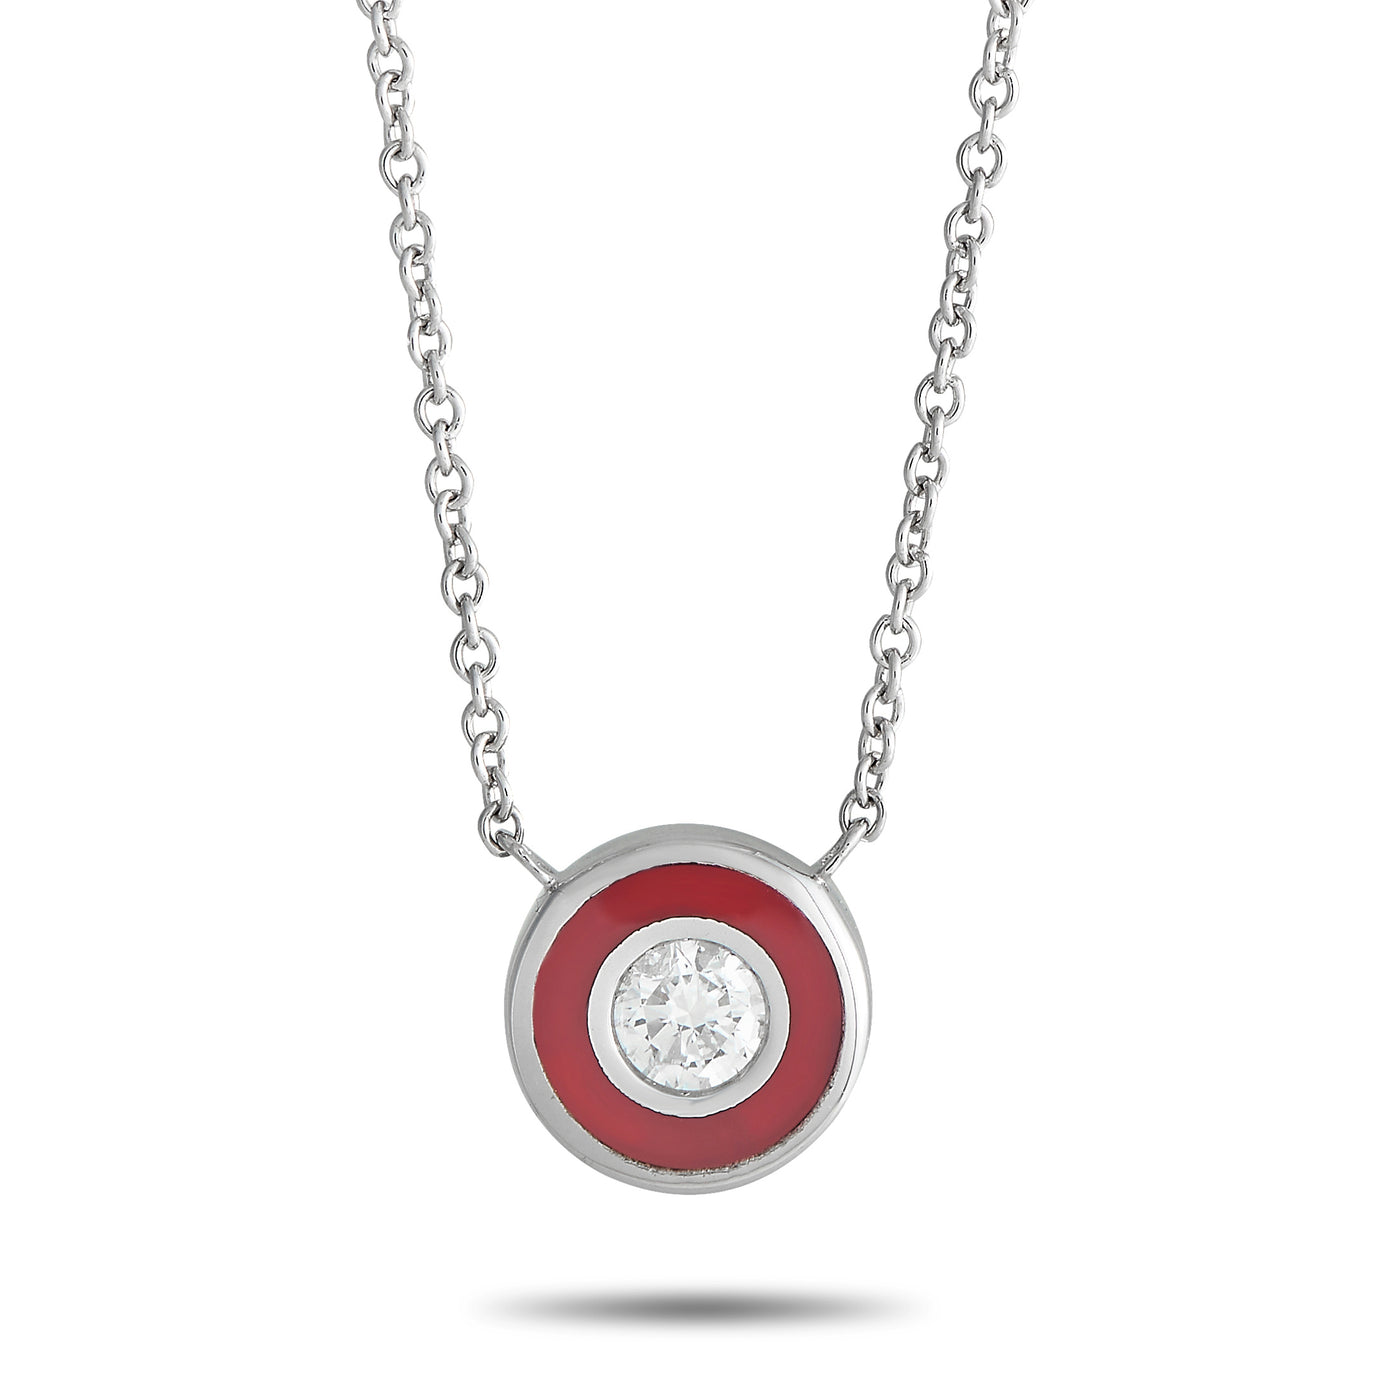 14K White Gold 0.13ct Diamond and Red Enamel Necklace